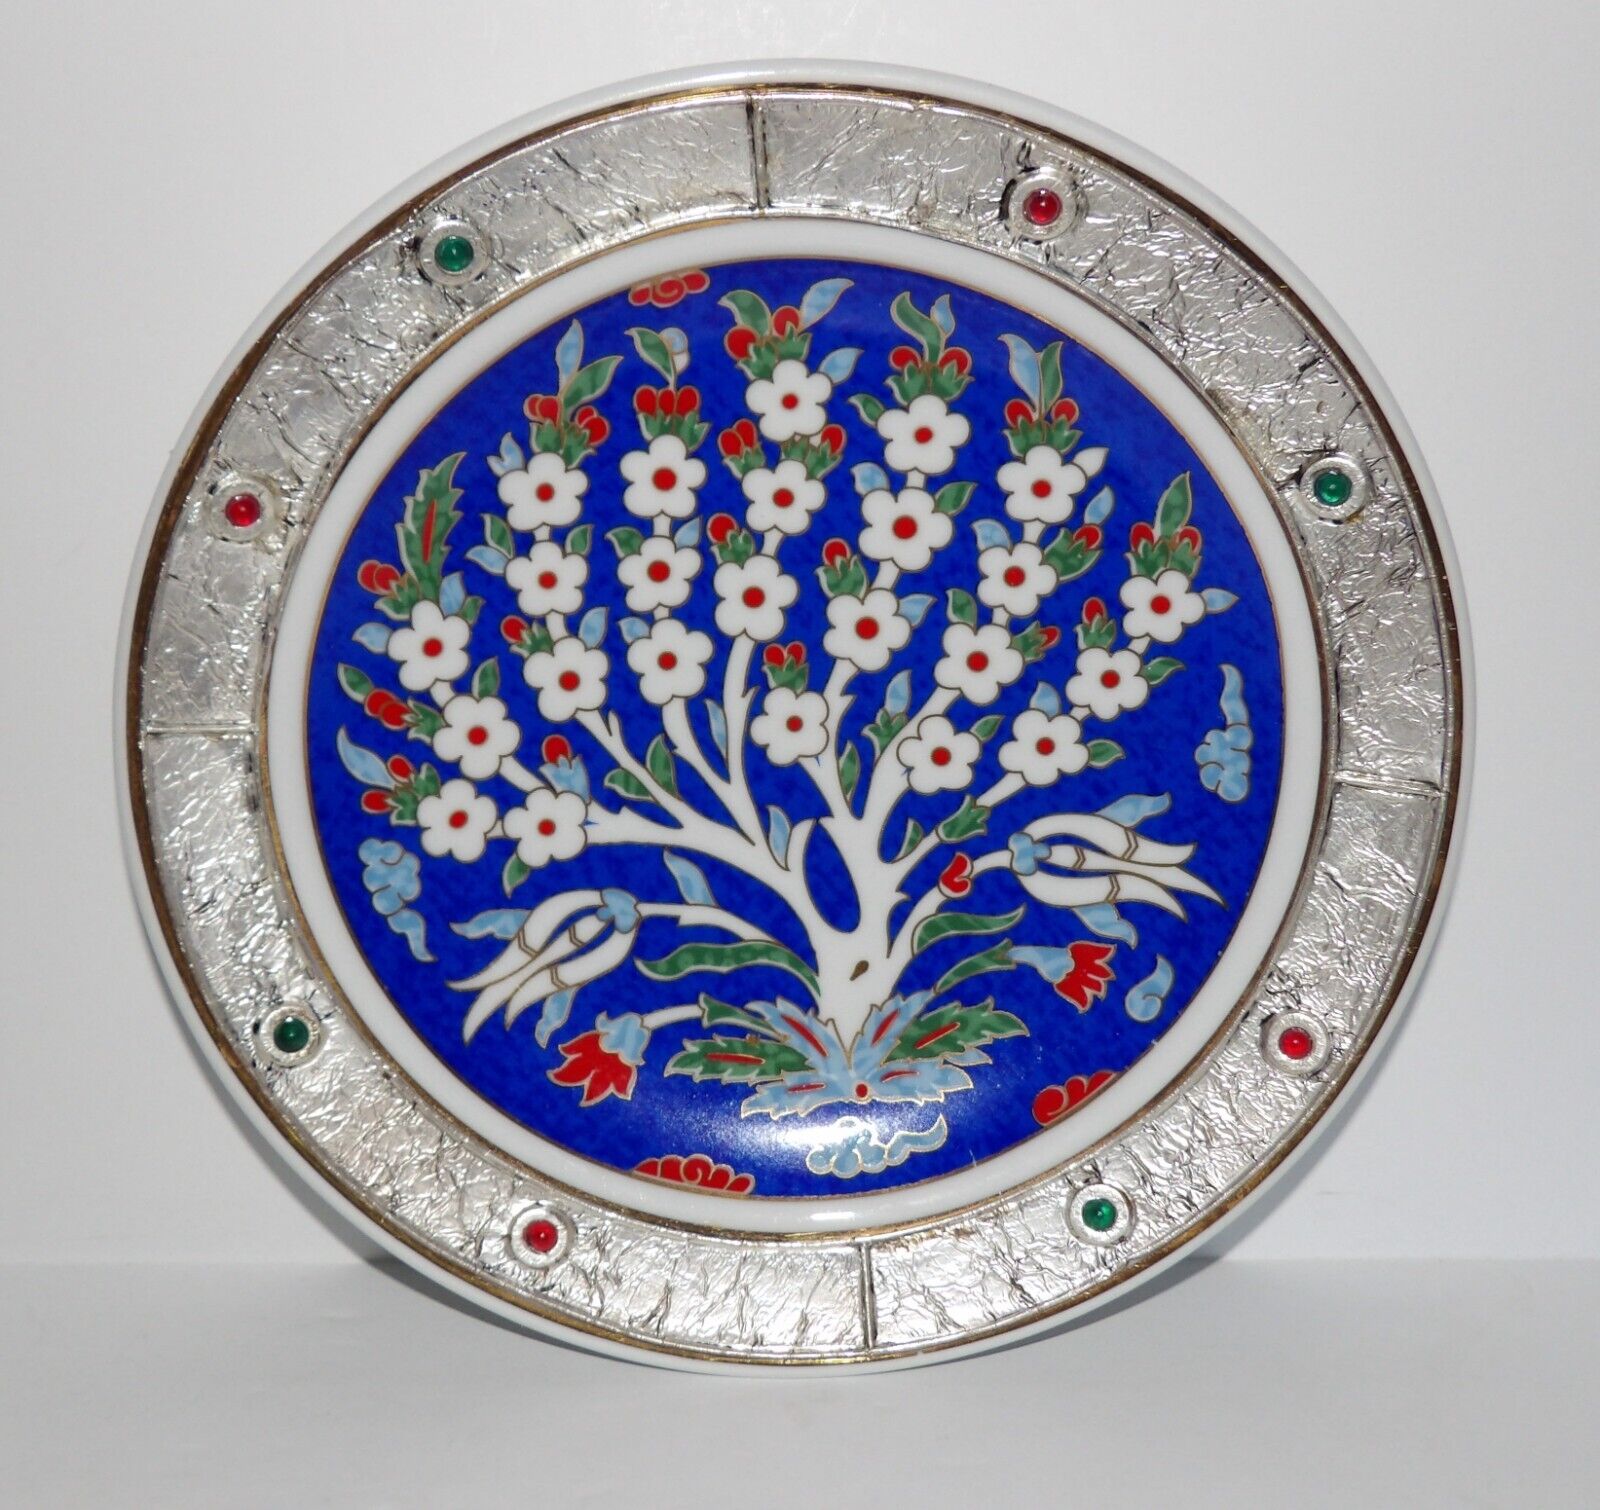 AUTHENTIC 2005 KUTAHYA PORSELEN TREE OF LIFE SILVER GOLD STONES HAND MADE PLATE